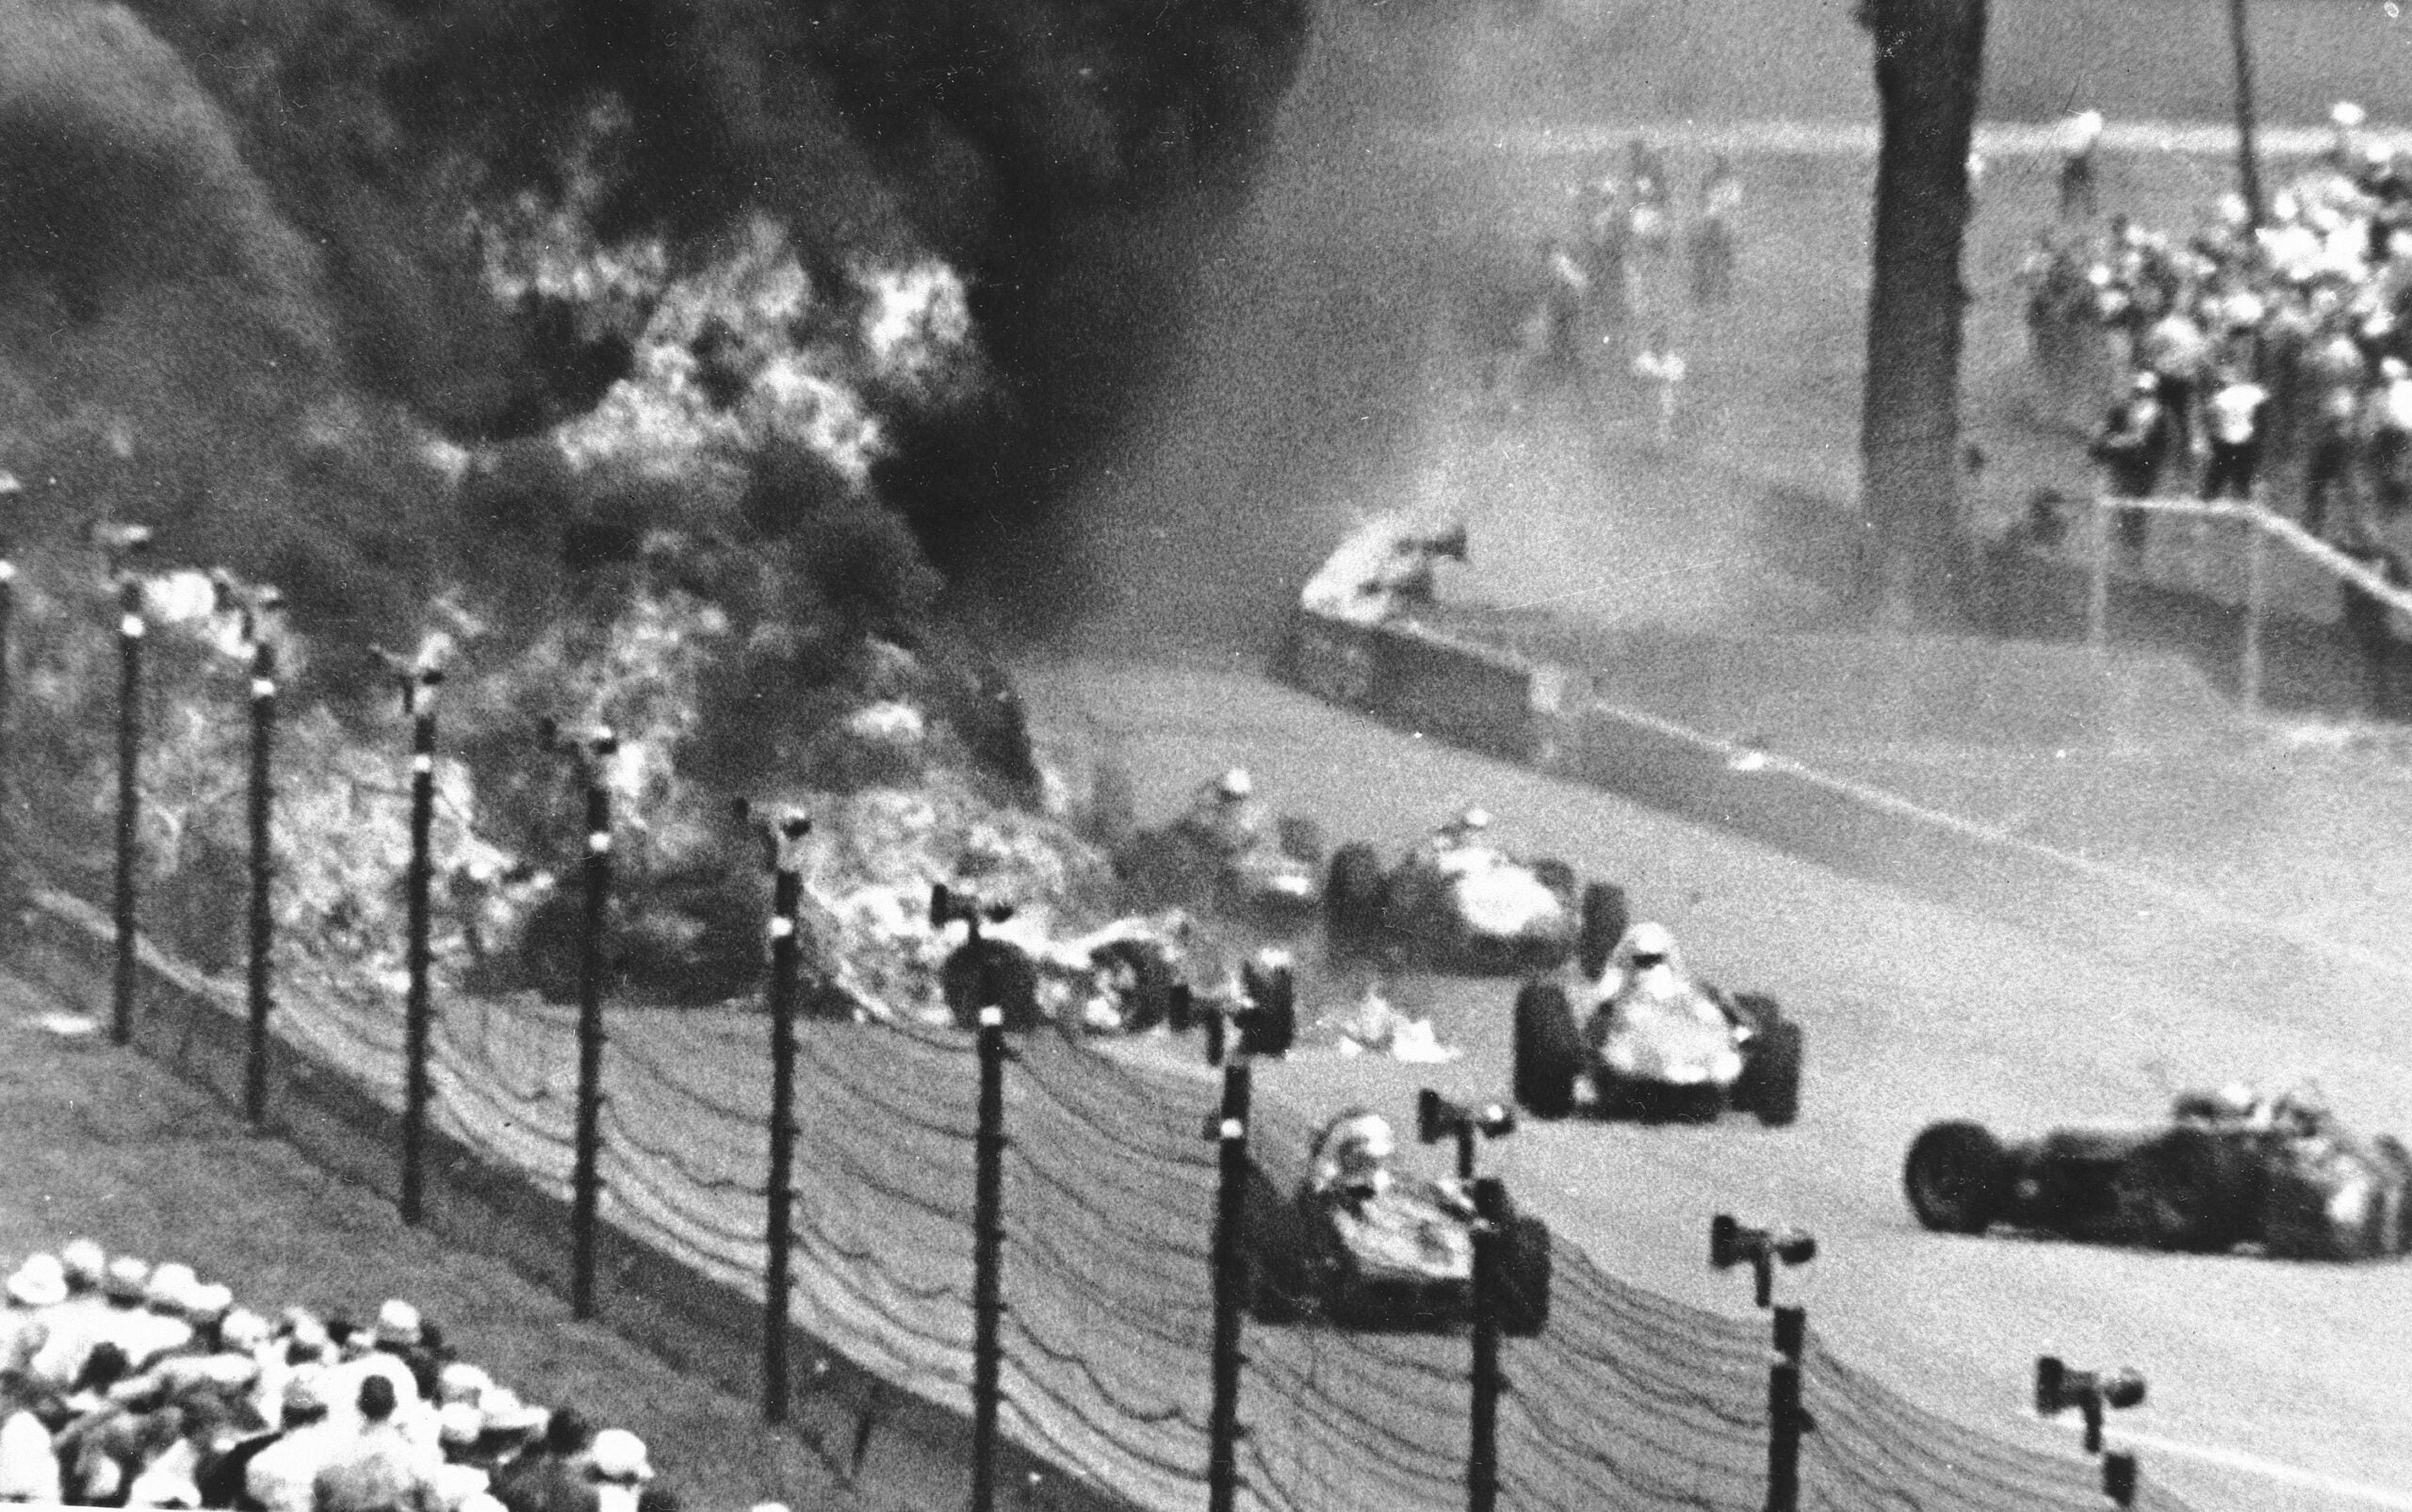 Deaths and tragedy from the 1973 Indy 500 opened the door for safety